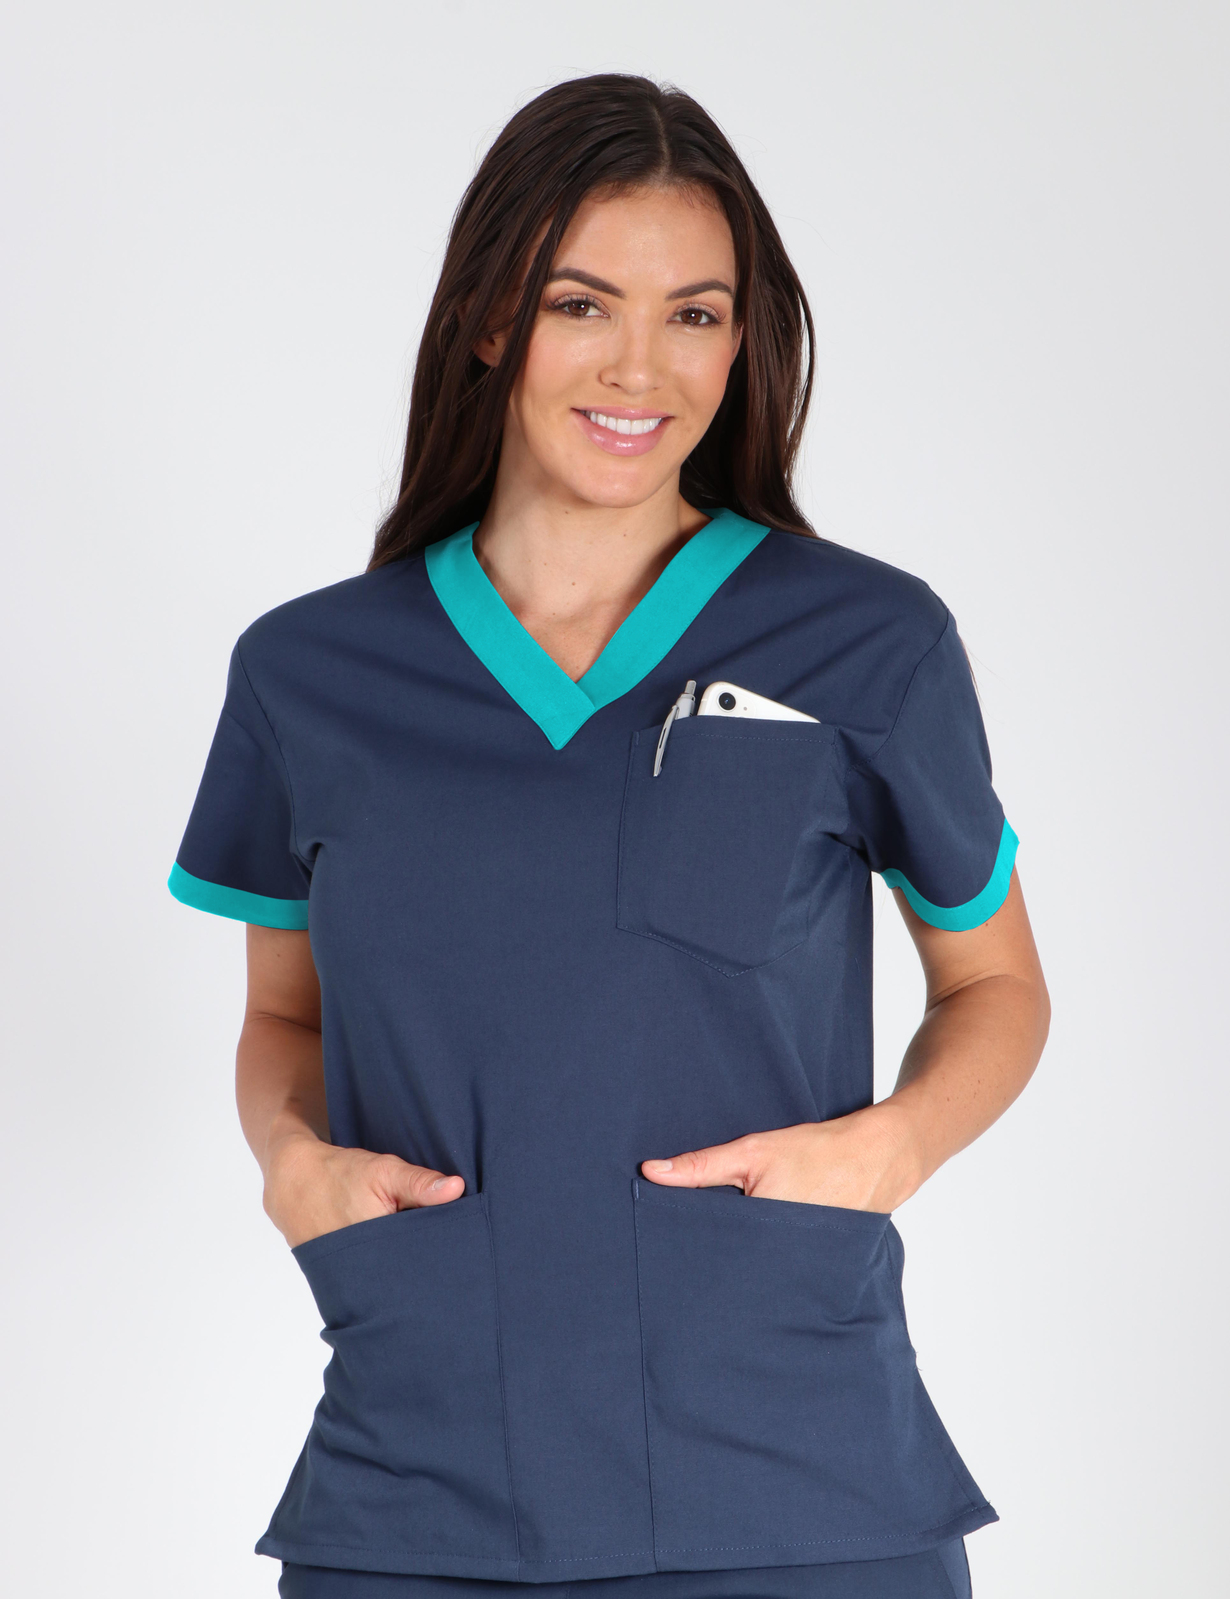 Perth Hospital - Medical Imaging Technologist (Contrast V-neck in Navy with Teal Trim and Cargo Pants incl Logos)